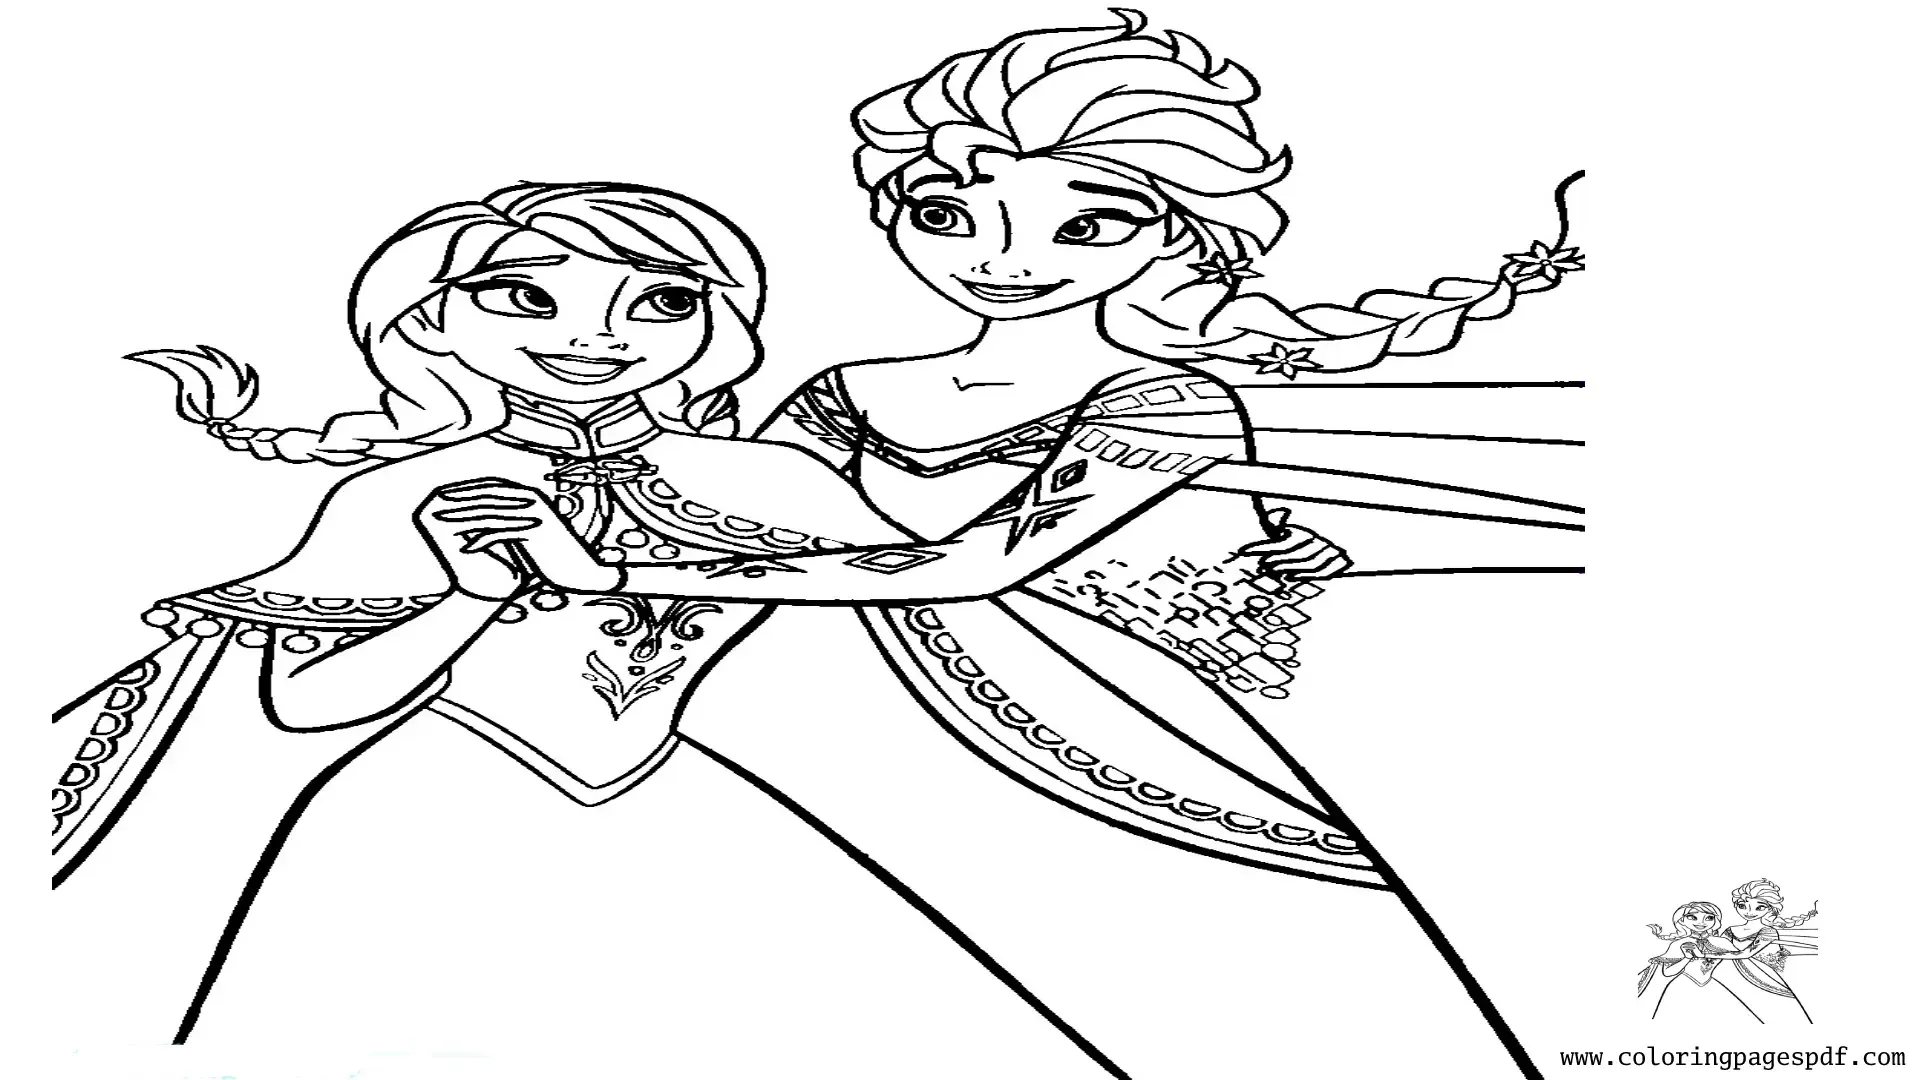 Coloring Page Of Elsa And Anna Holding Hands